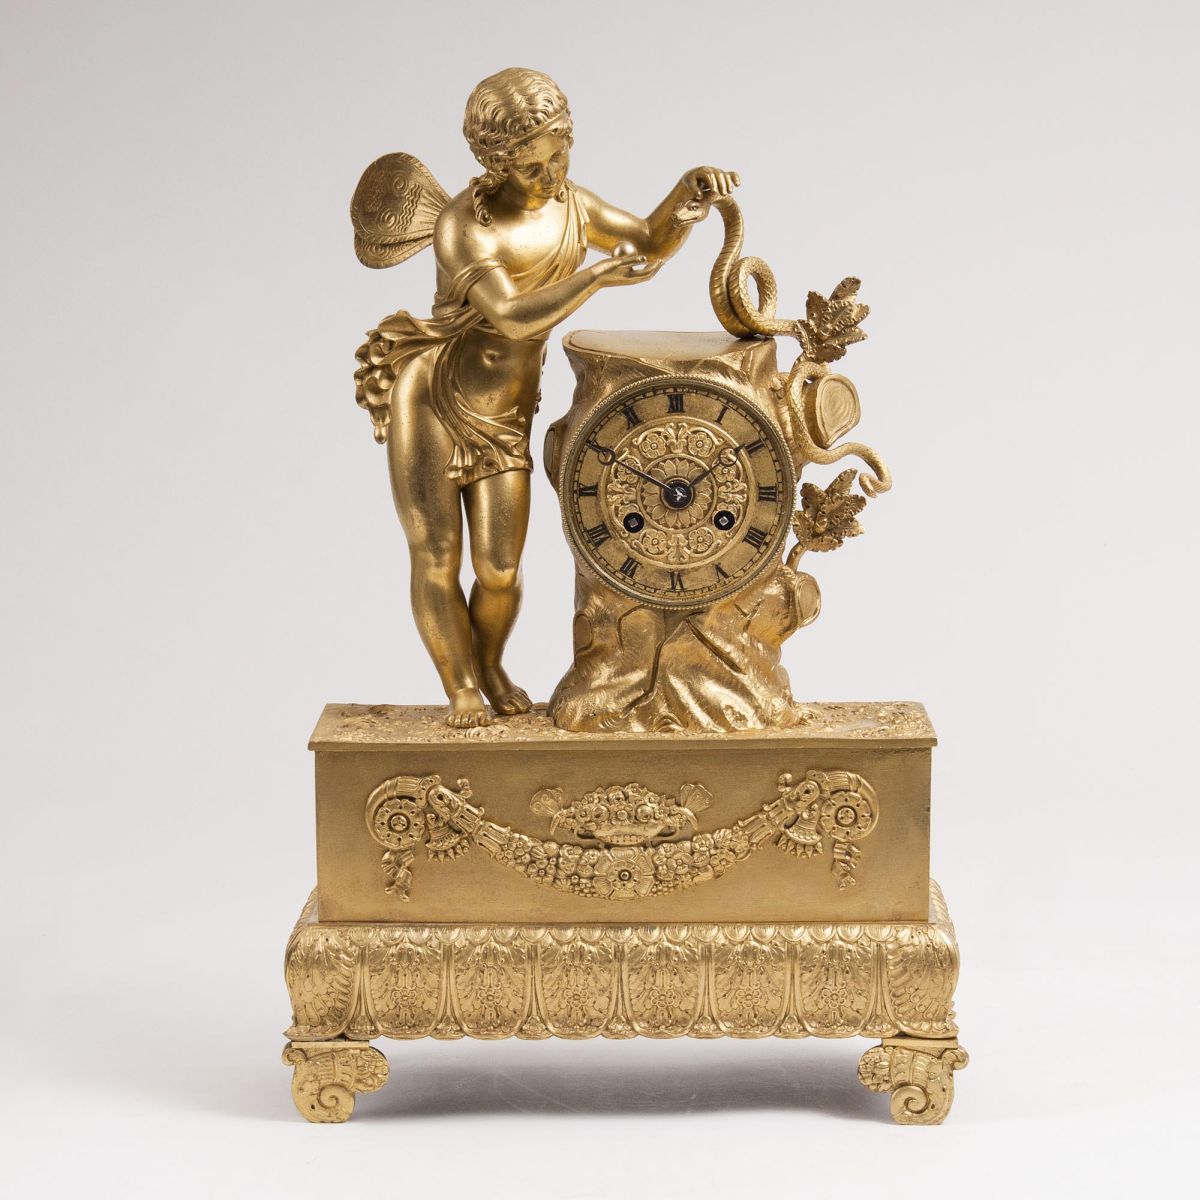 An Empire Pendulum 'Psyche with Snake'